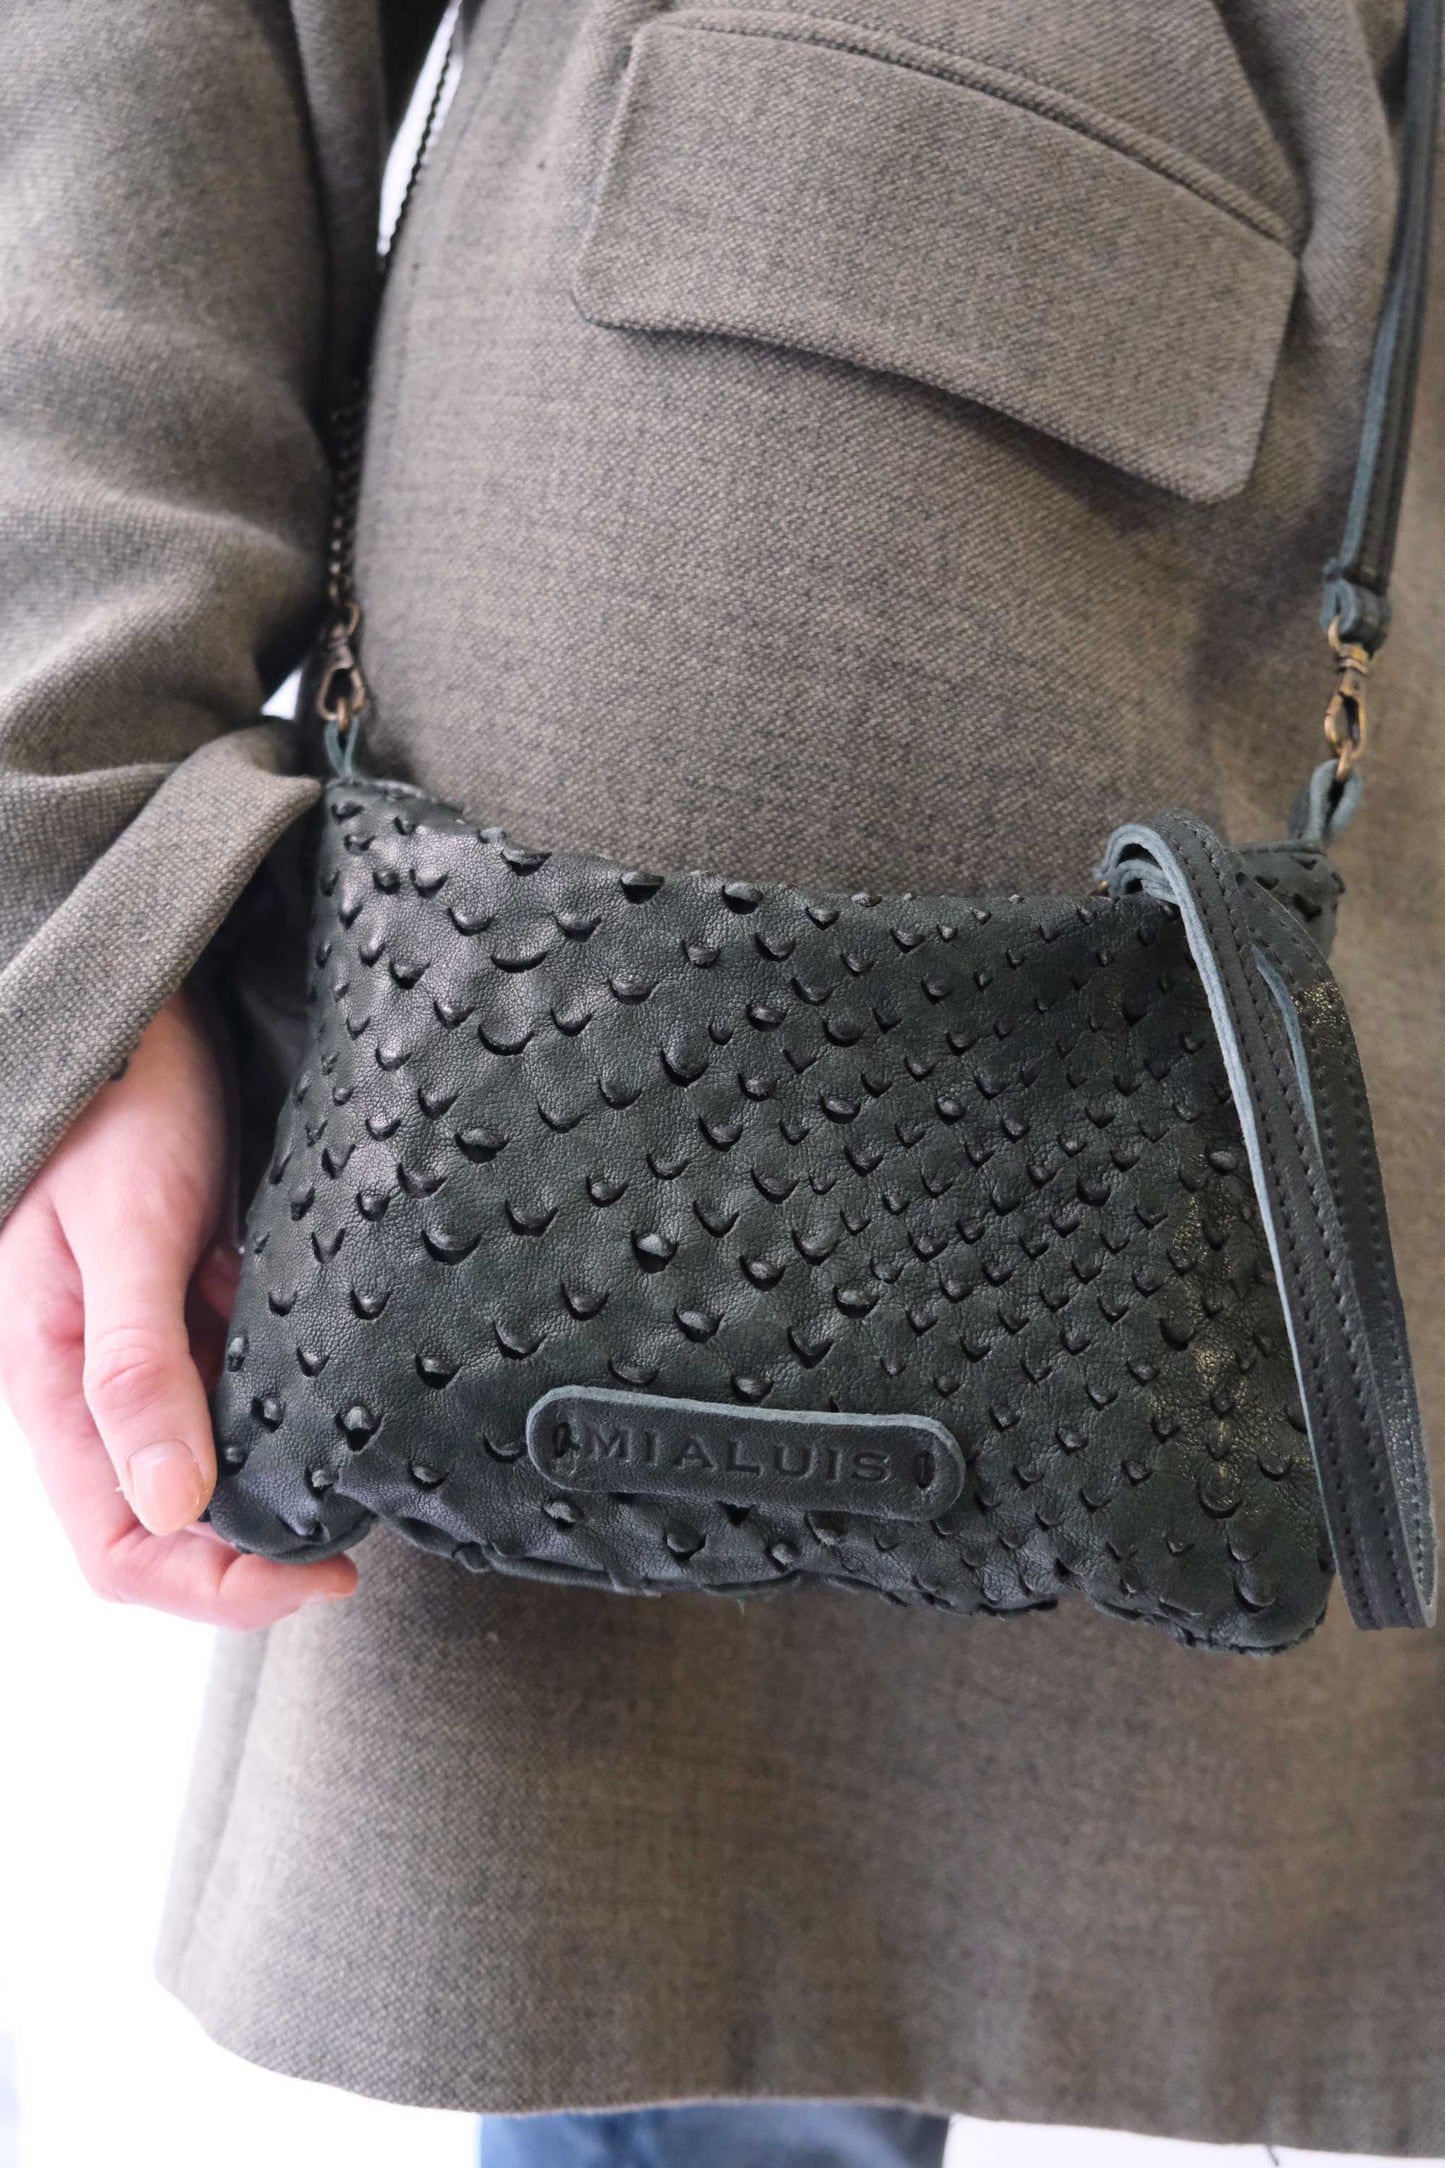 Tina pochette in pine perforated leather